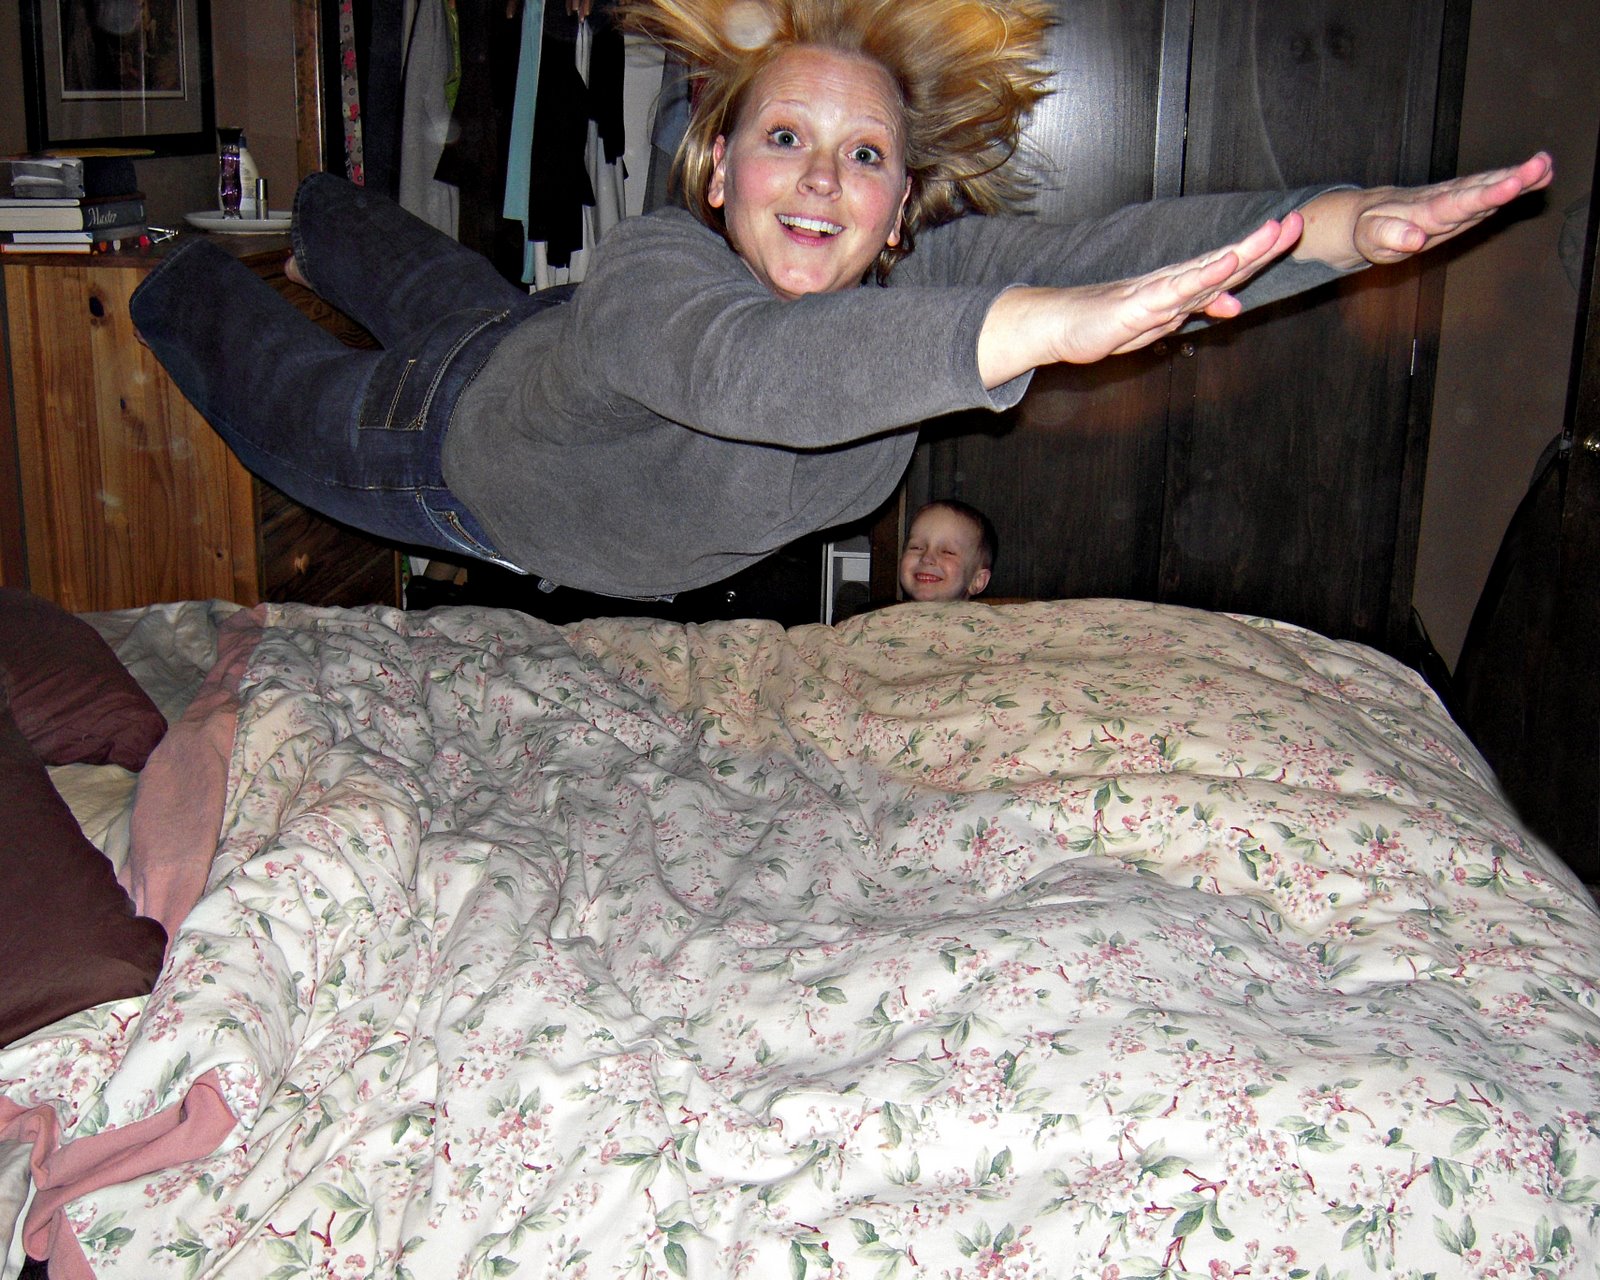 [jumping+on+bed.jpg]